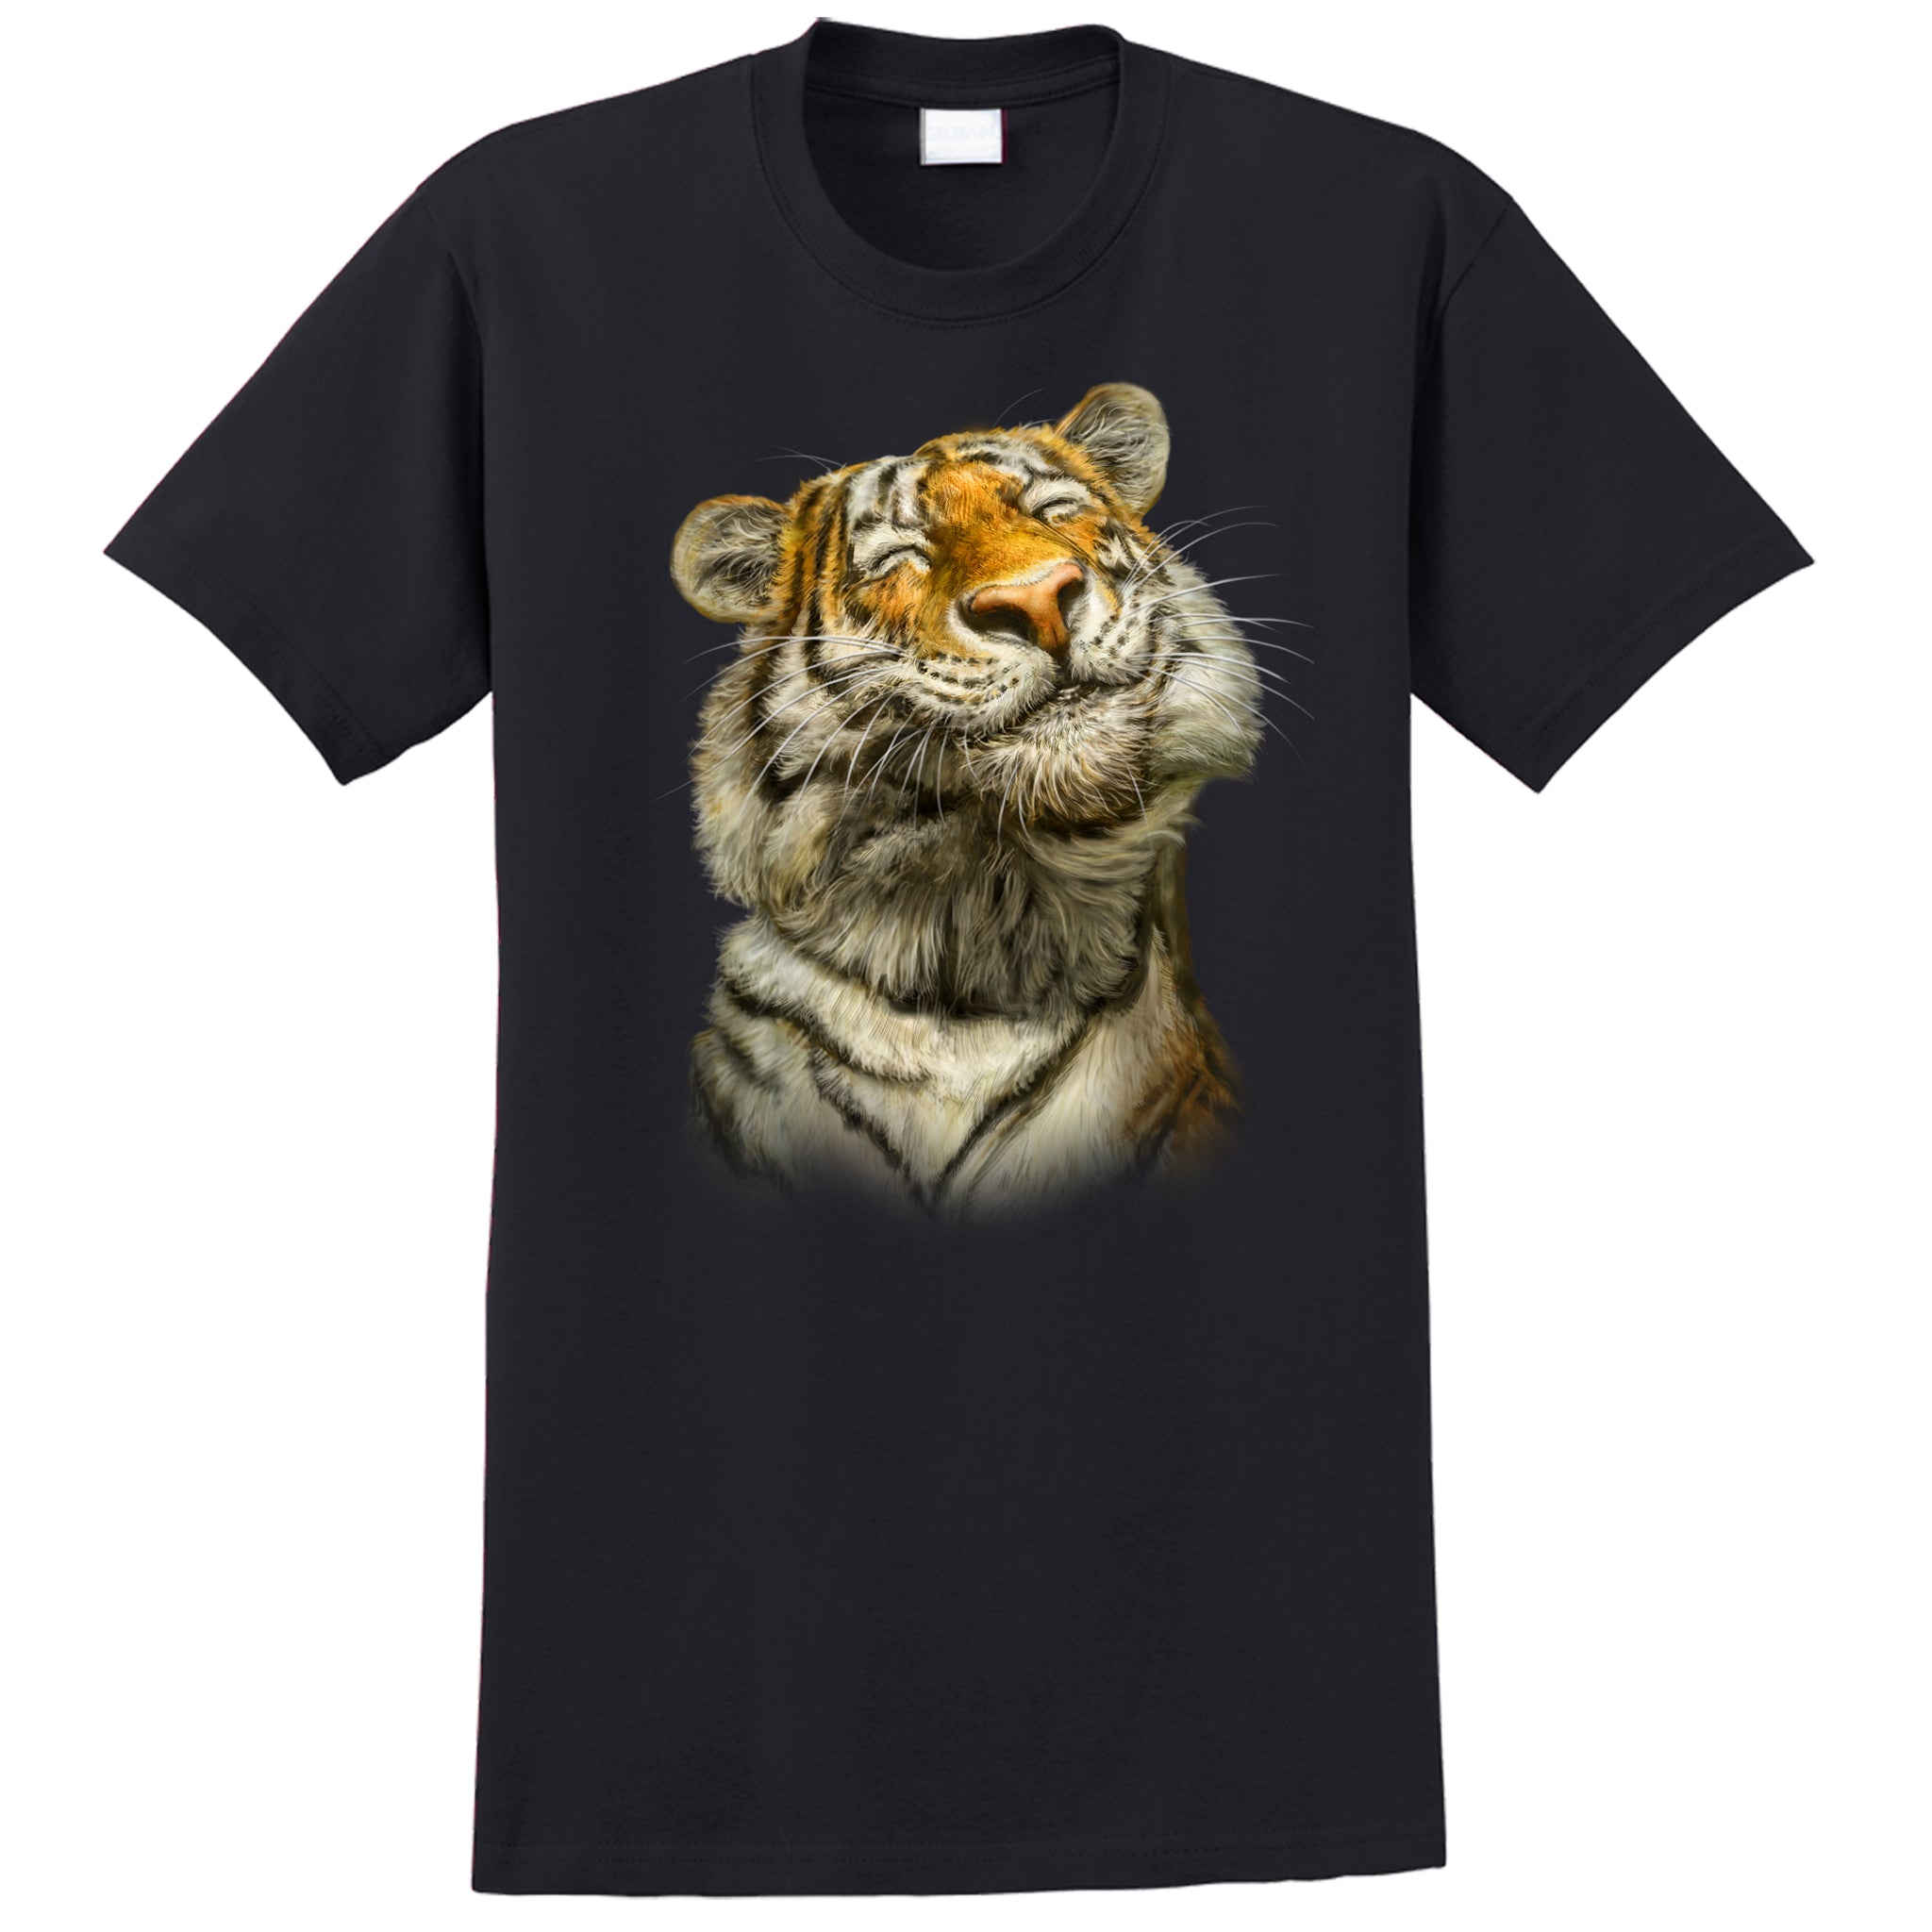 Smiling Tiger - black t-shirt with tiger art by Canadian artist Patrick LaMontagne